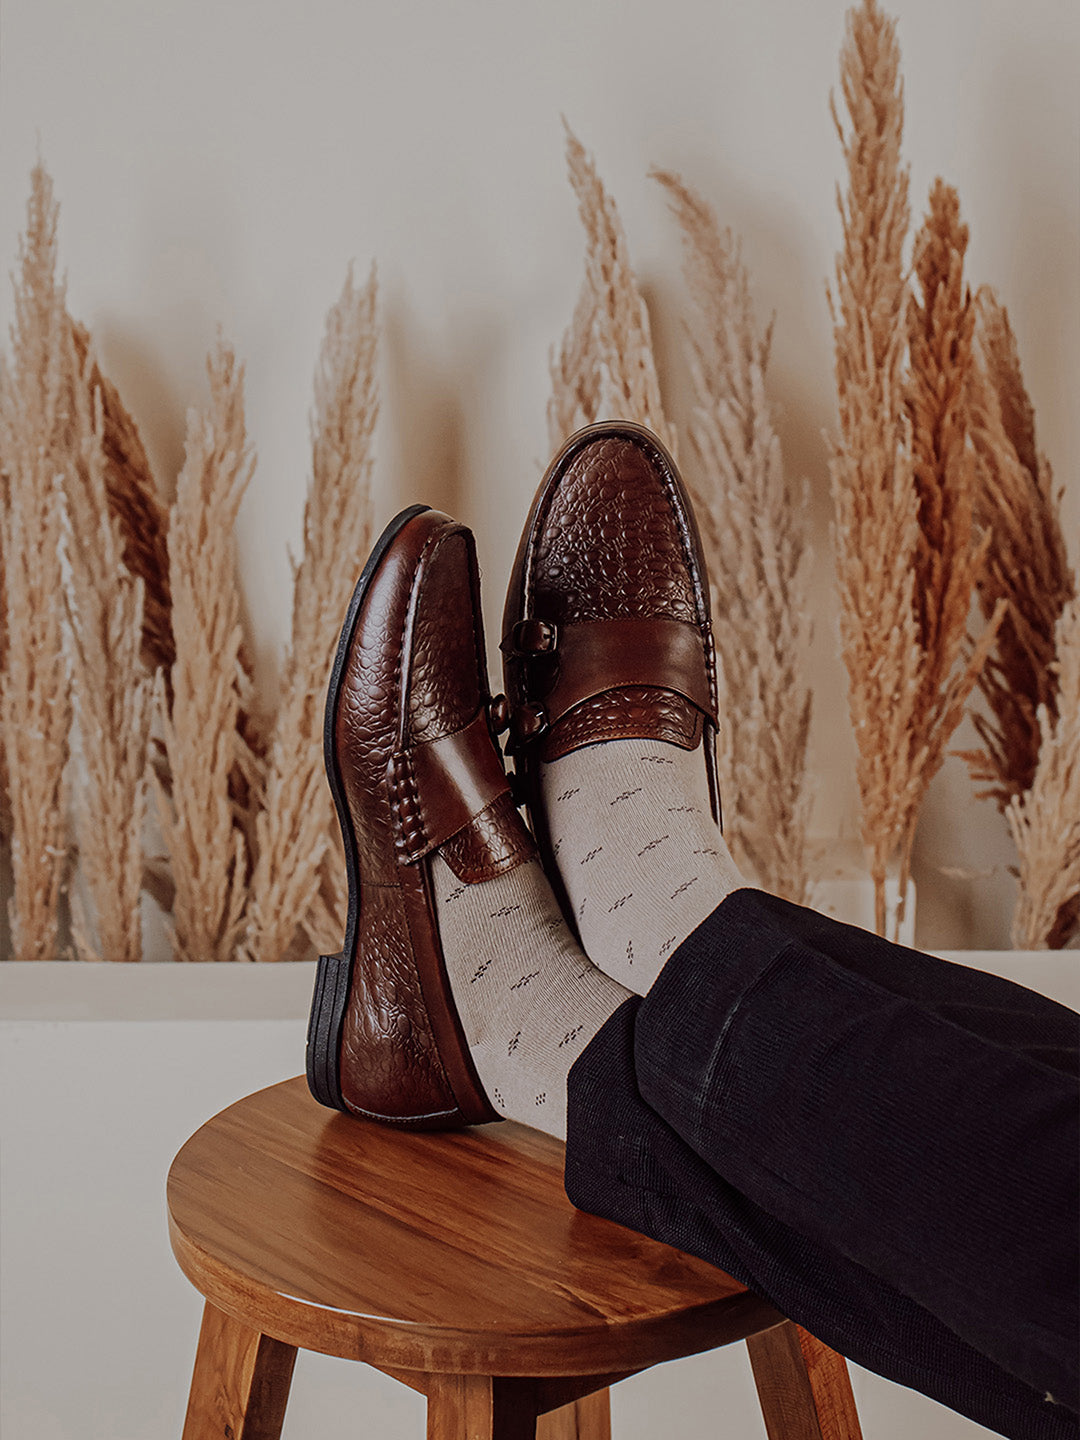 Men's Brown Leather Slip-on Monk Shoes